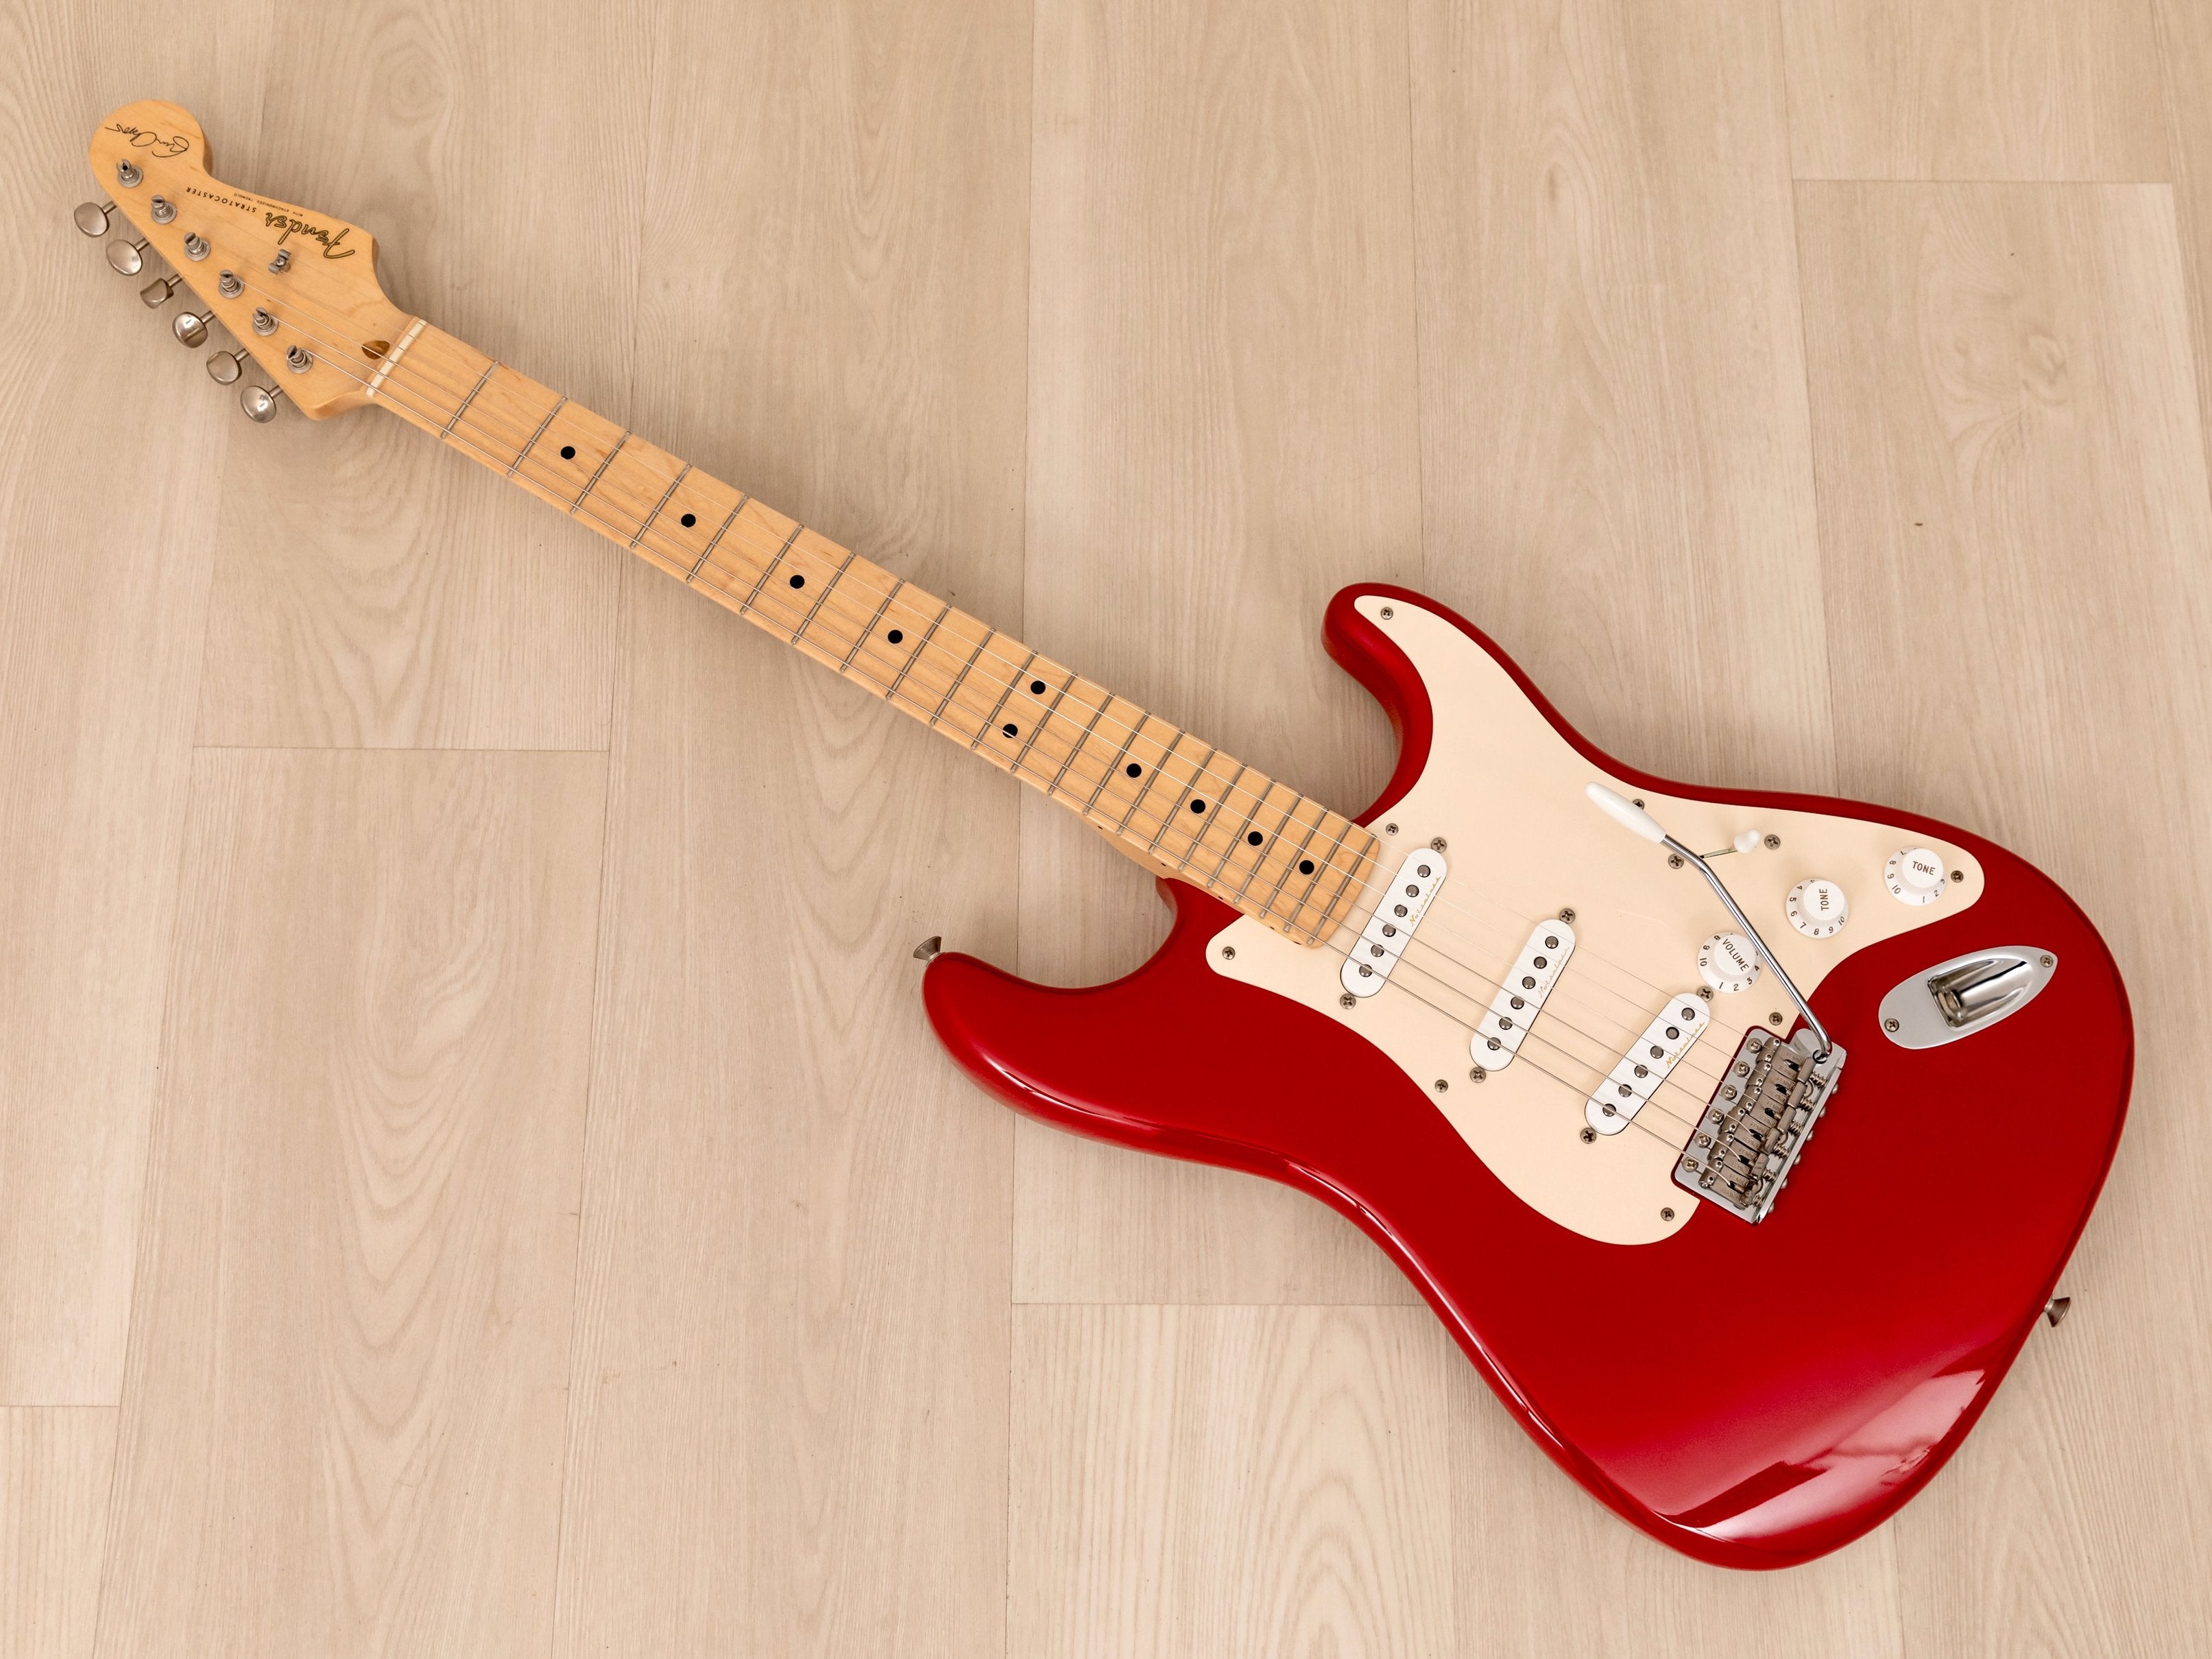 2009 Fender Artist Series Eric Clapton Signature Stratocaster Torino Red, Near Mint w/ Tweed Case & Tags